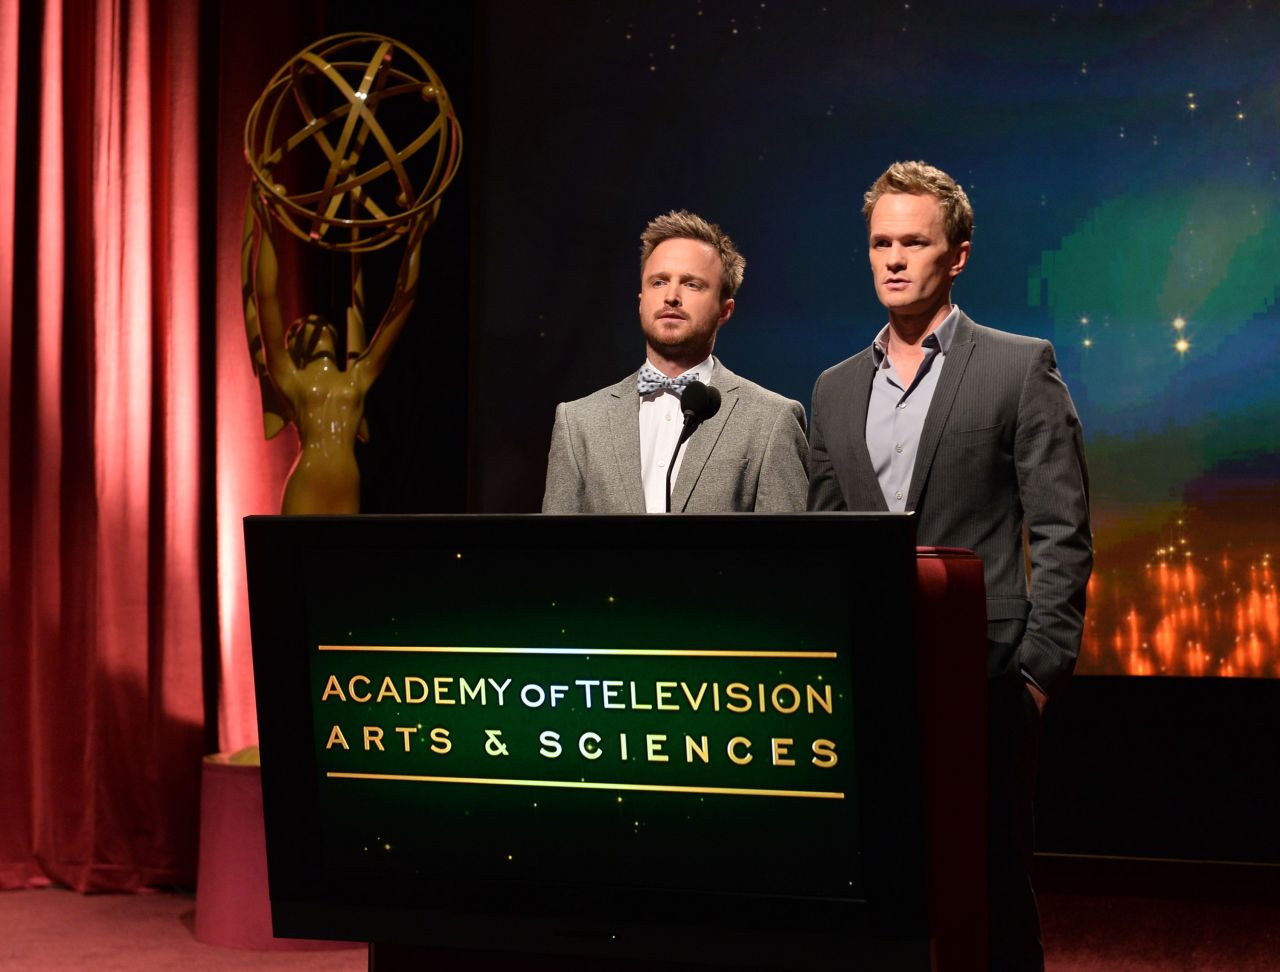 The nominees for the 65th Primetime Emmy Awards were announced by Aaron Paul and Neil Patrick Harris on Thursday, July 18. And the nominees are ...